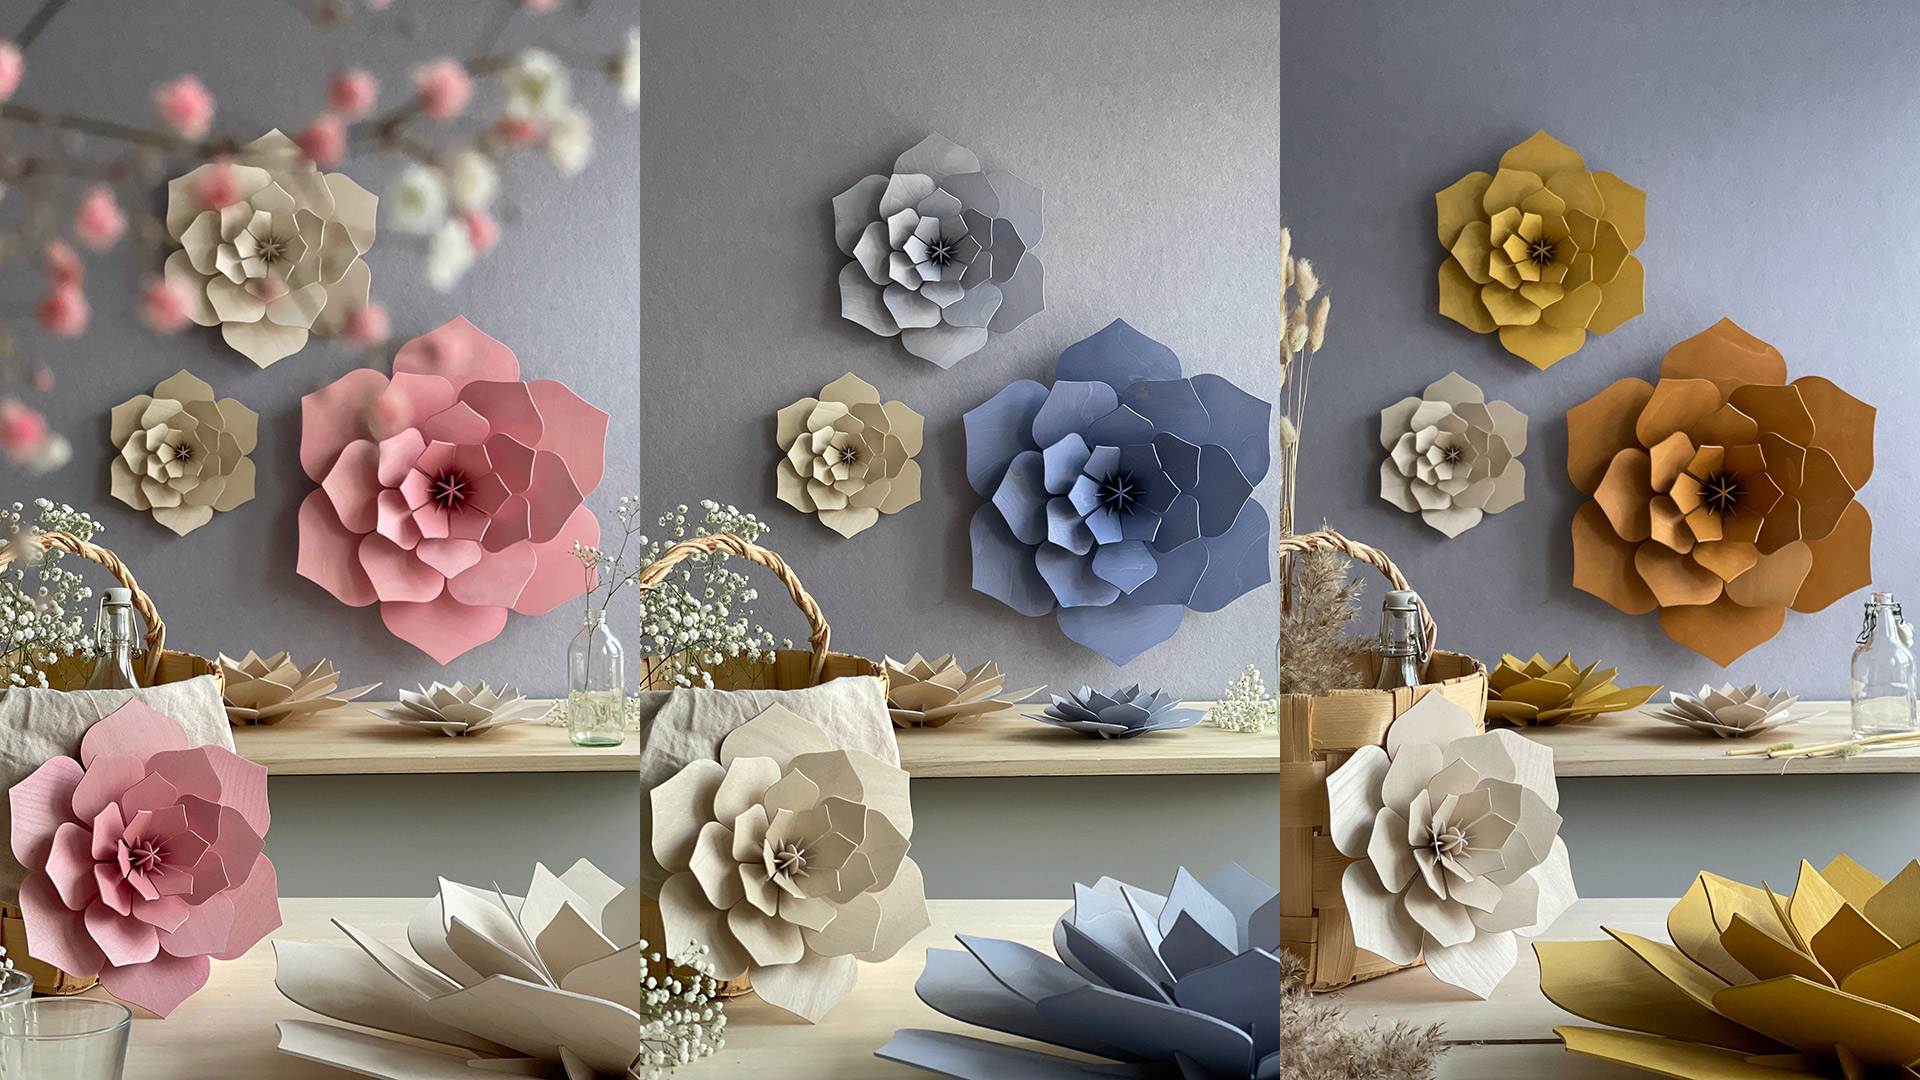 Wooden Decor Flowers by Lovi mounted on the wall and on table, different sizes and colors.